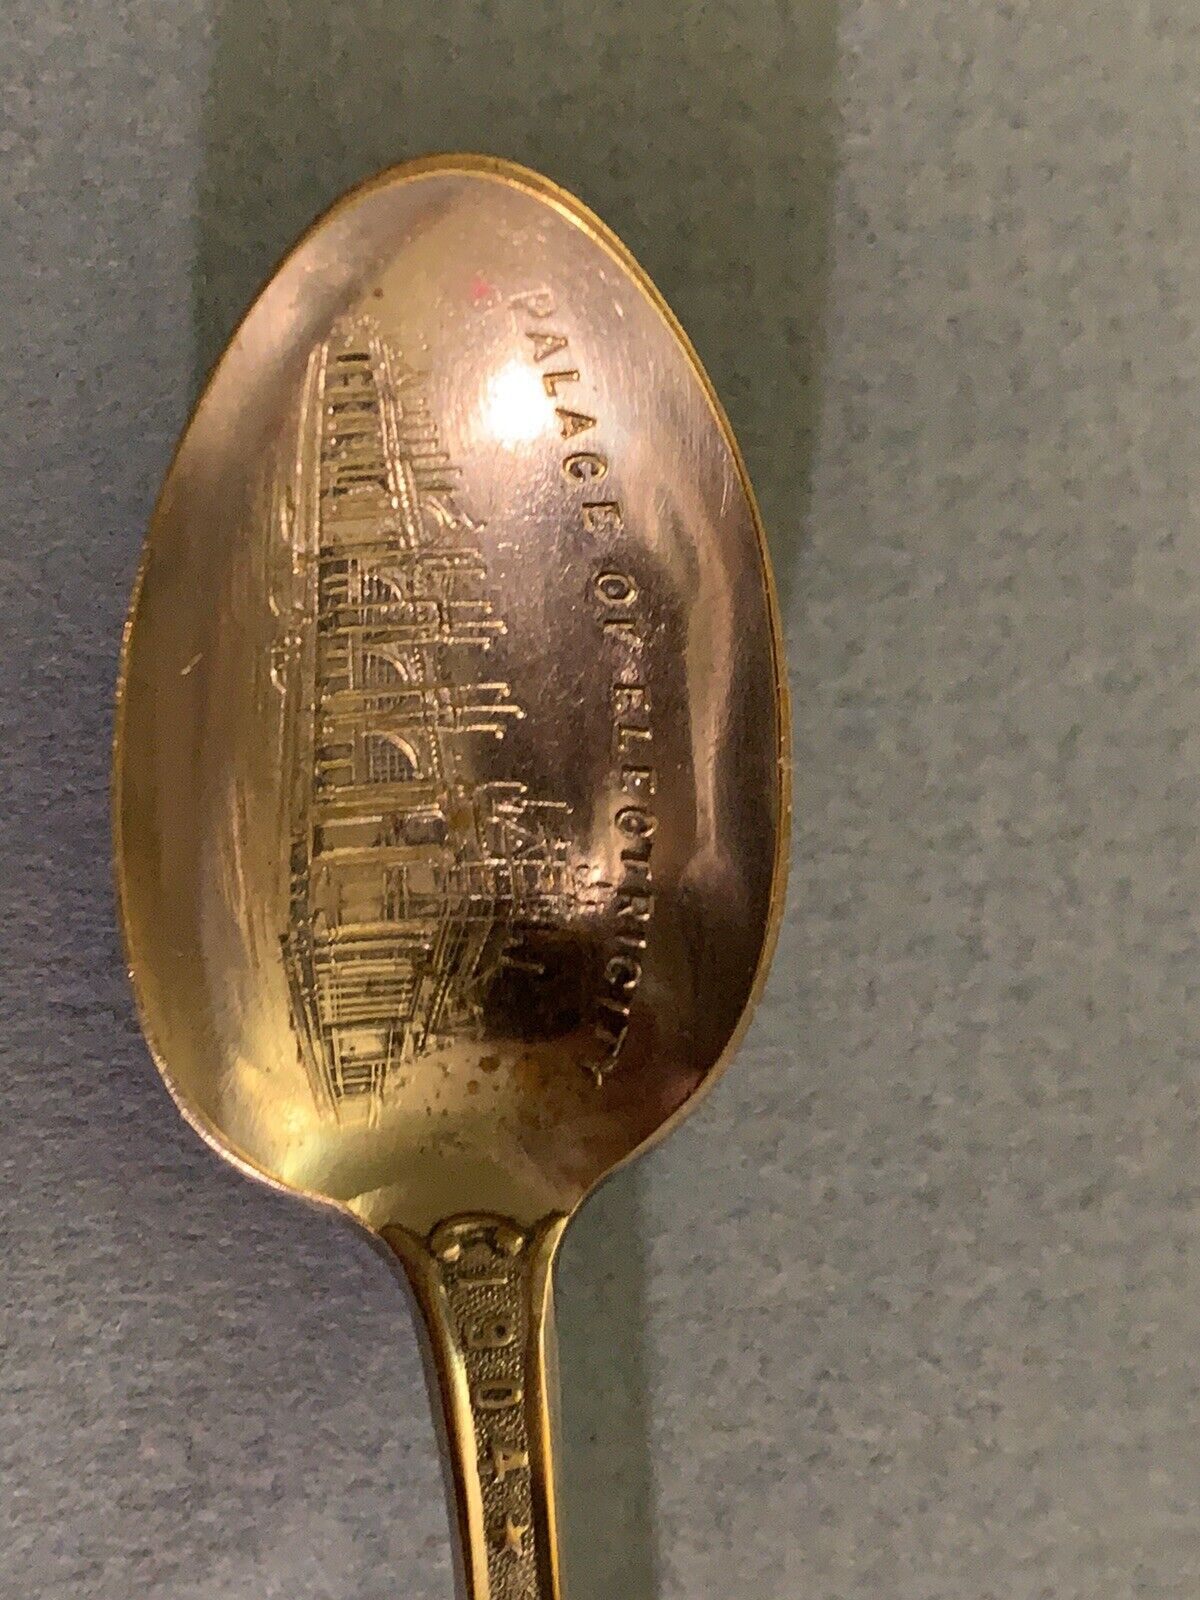 Vintage Silver Plate Spoon - Louisiana Purchase Exposition - St. Louis 1904